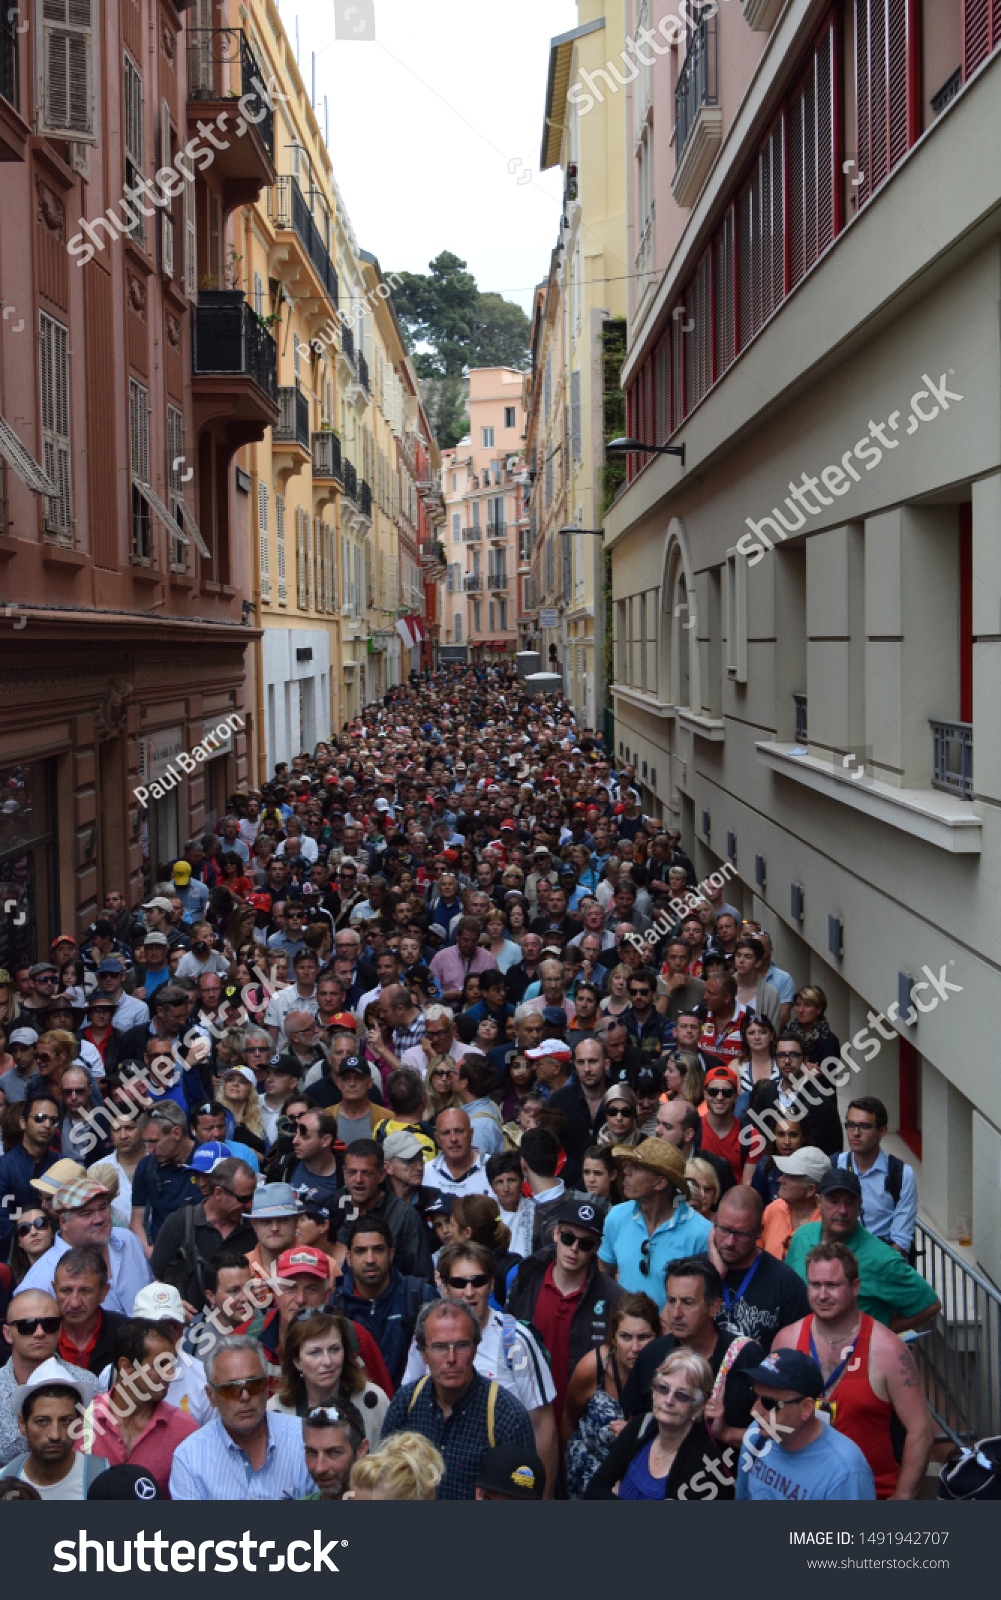 stock-photo-monte-carlo-monaco-may-a-huge-crowd-of-fans-and-spectators-leave-the-monaco-formula-1491942707.jpg